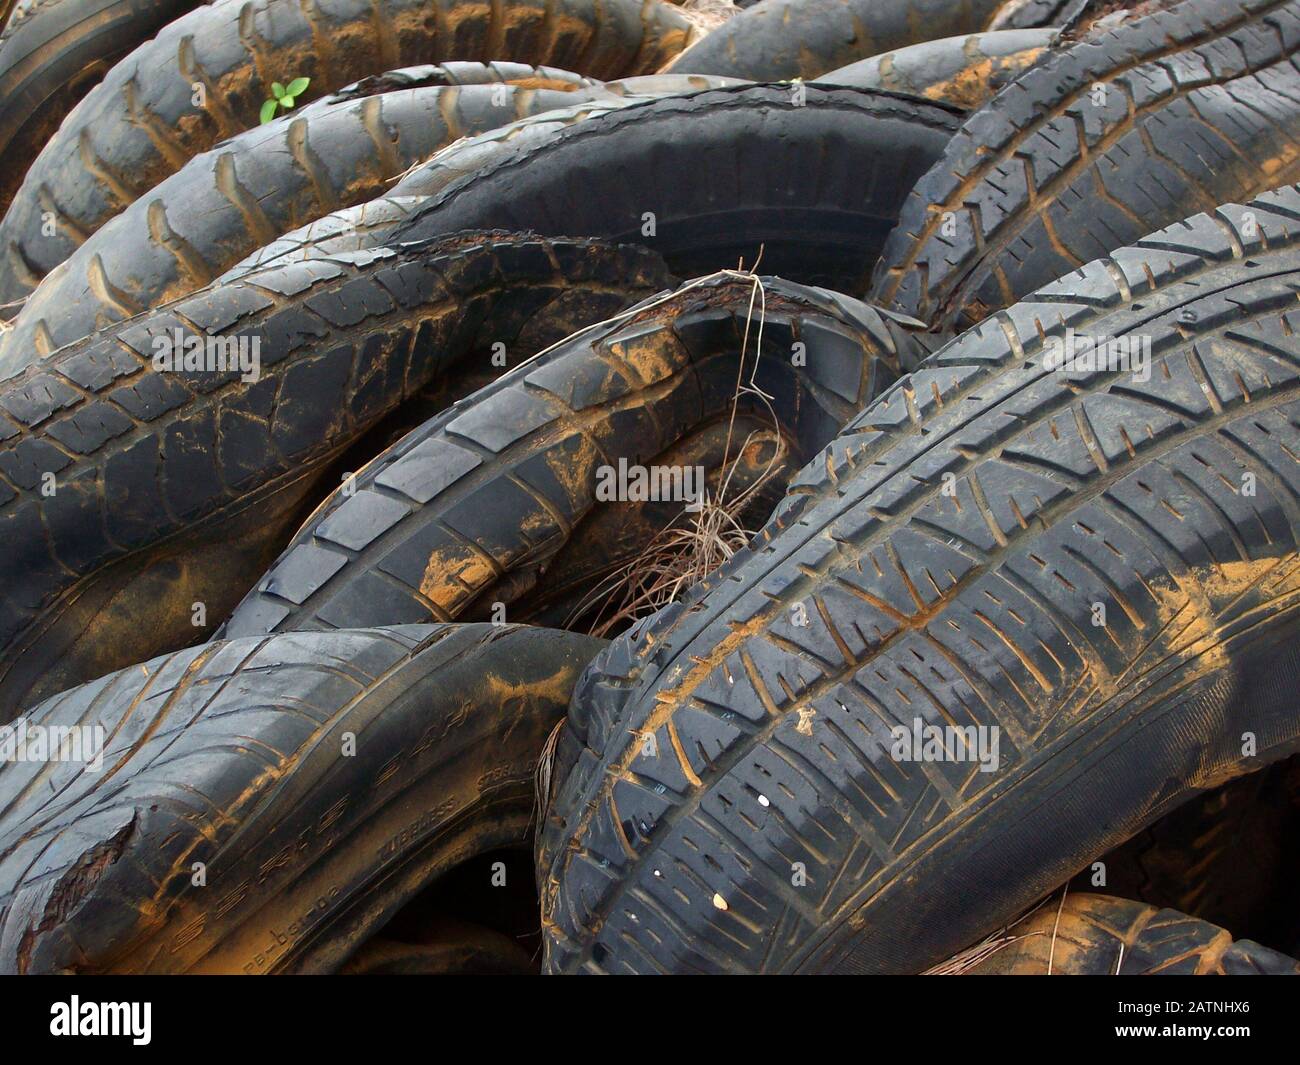 Close up of a pile of old tires squeezed together at a dump site Stock Photo